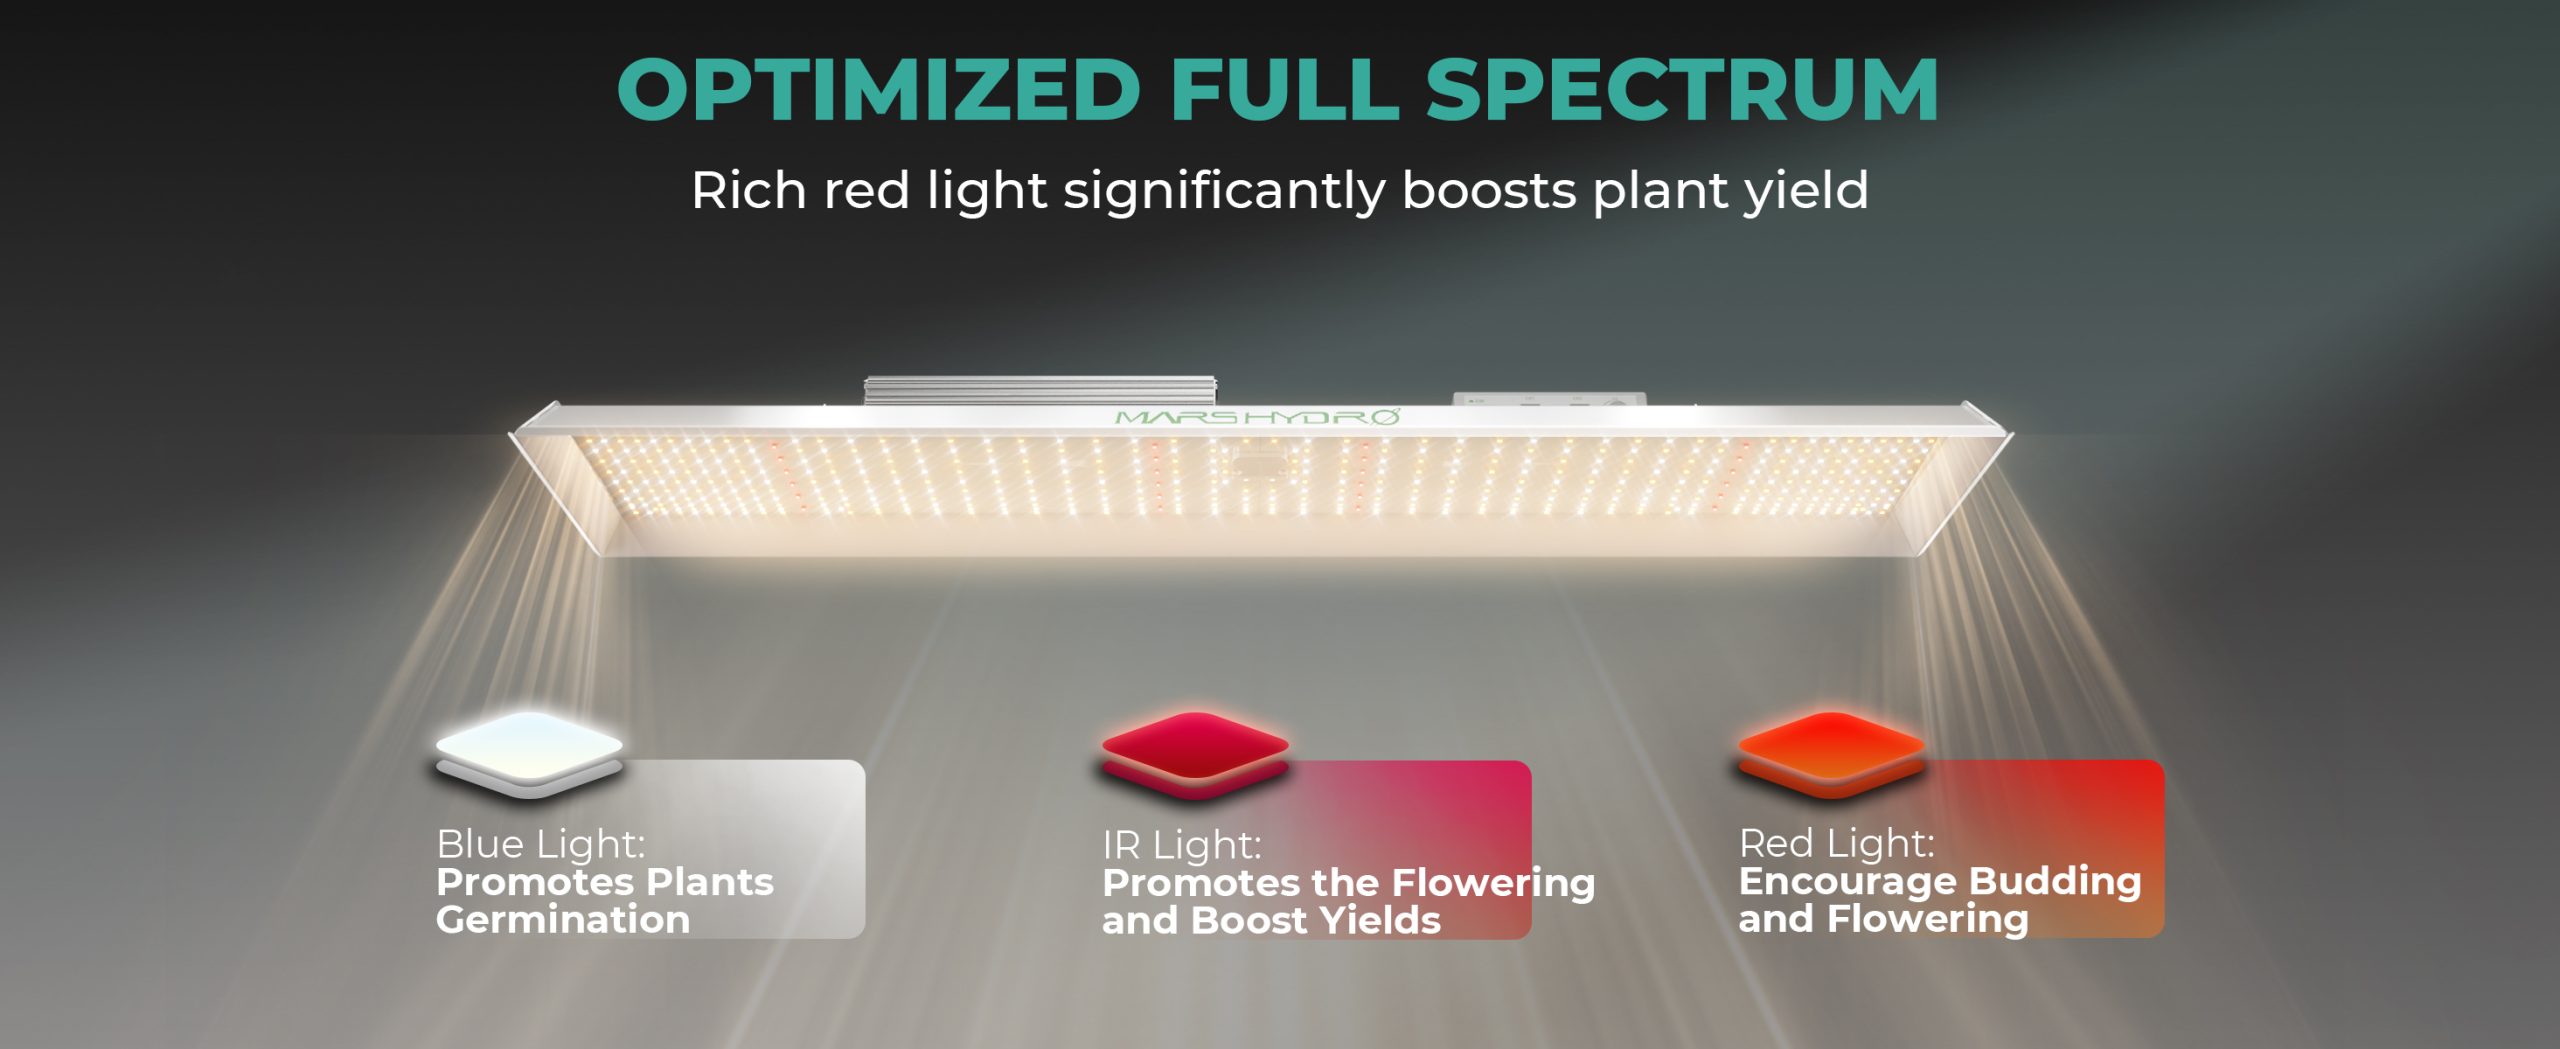 Mars-Hydro-TSL2000-OPTIMIZED-FULL-SPECTRUM-Rich-red-light-significantly-boosts-plant-yield-scaled.jpg